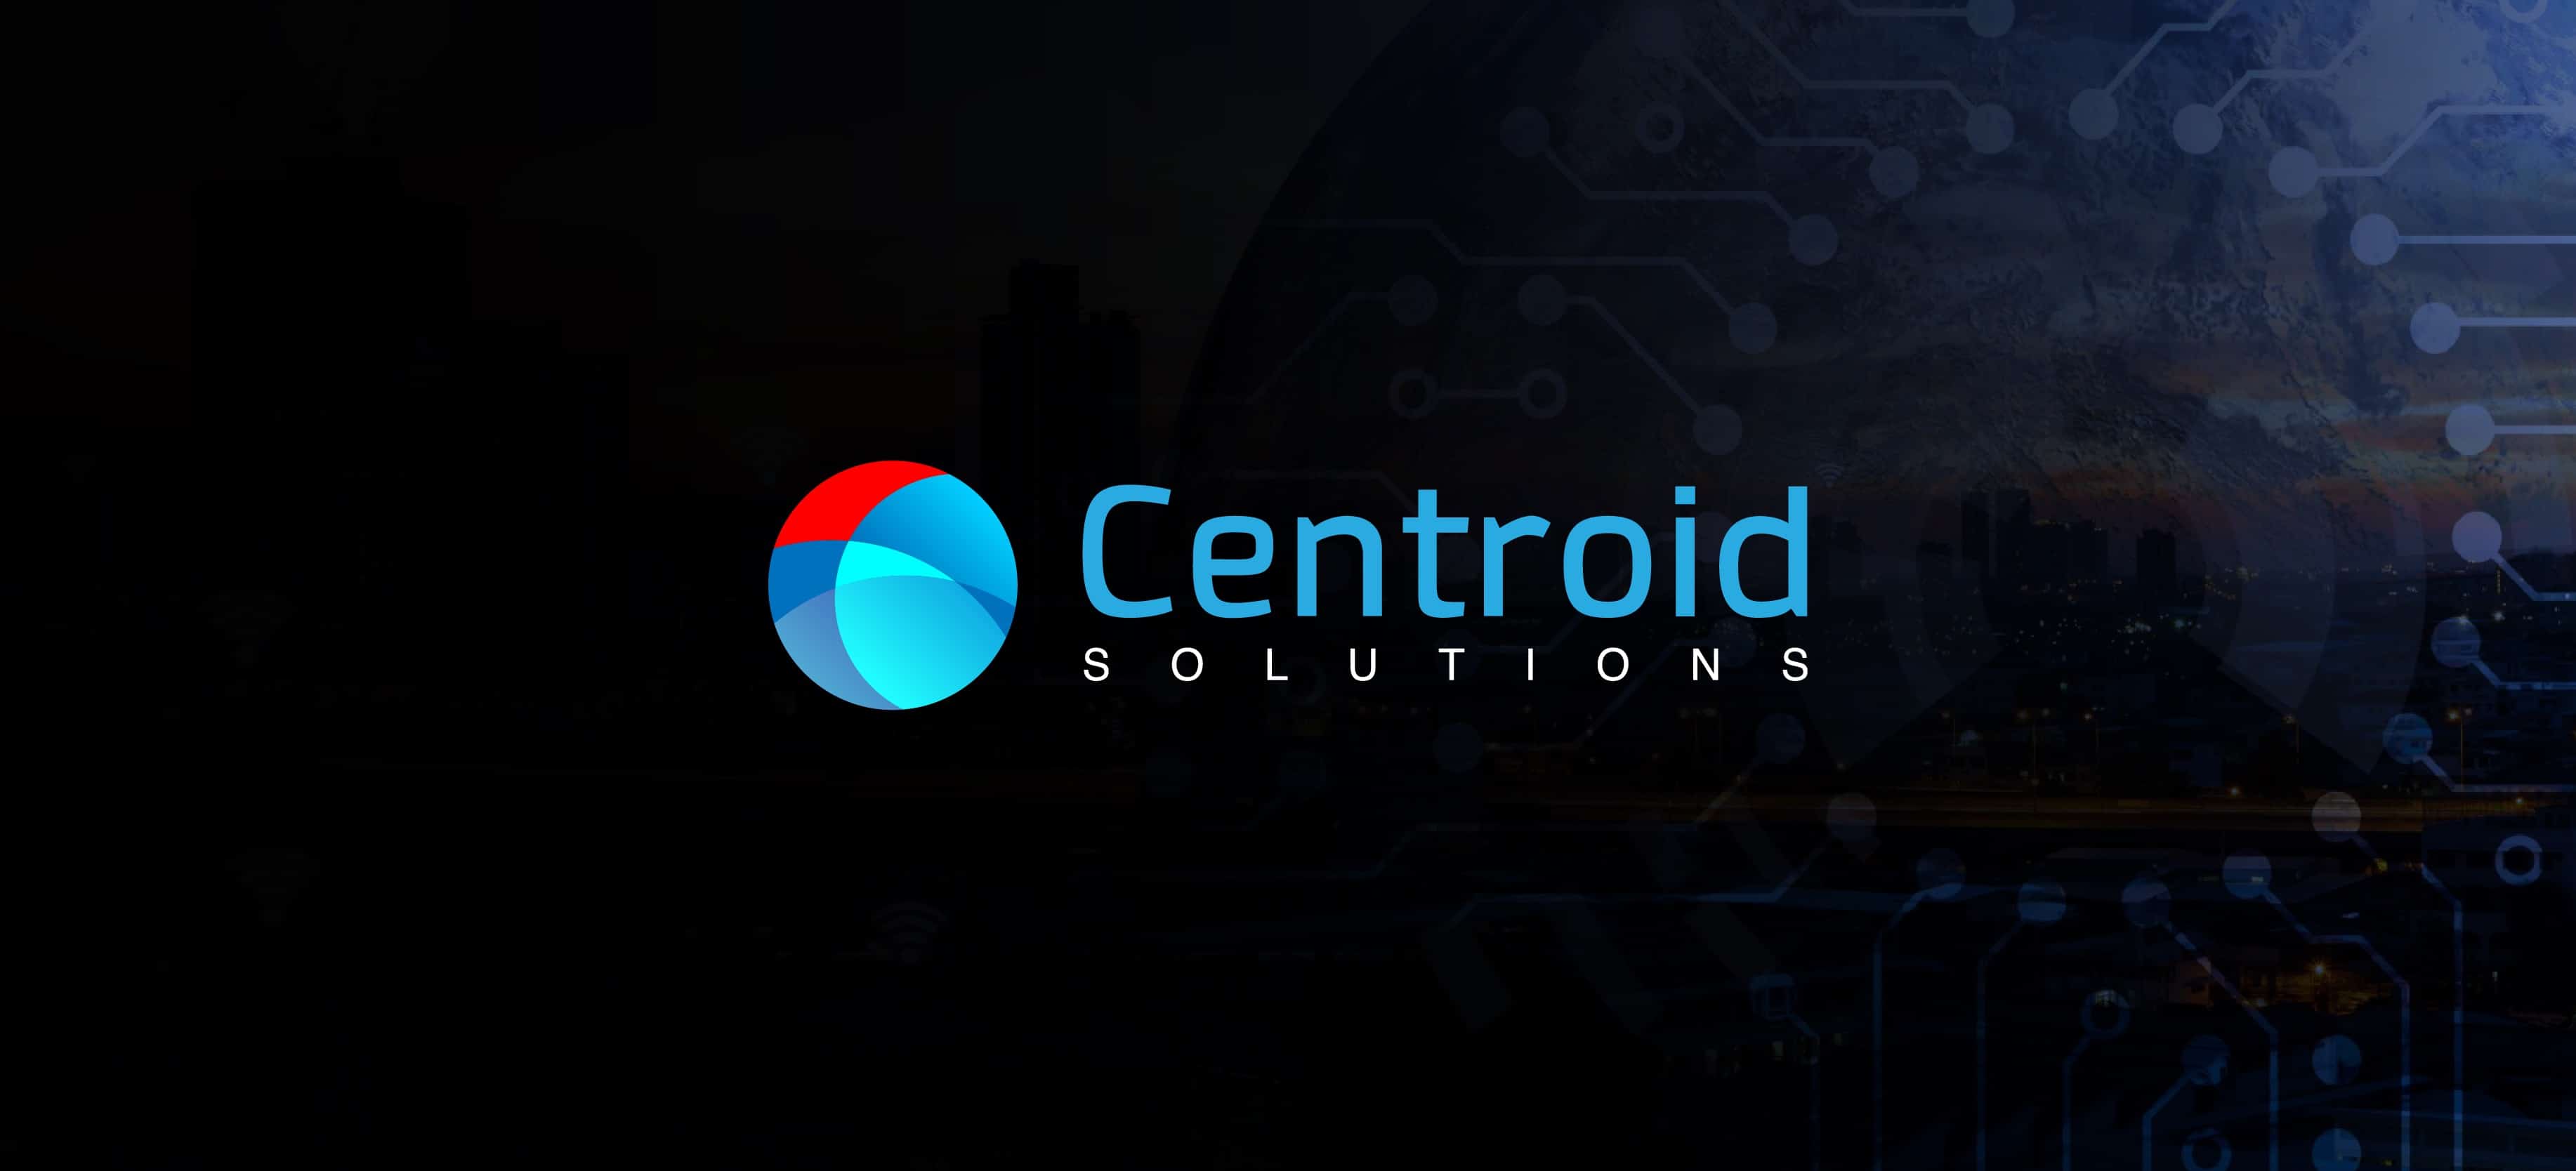 Centroid Solutions Launches Proprietary Liquidity Aggregator